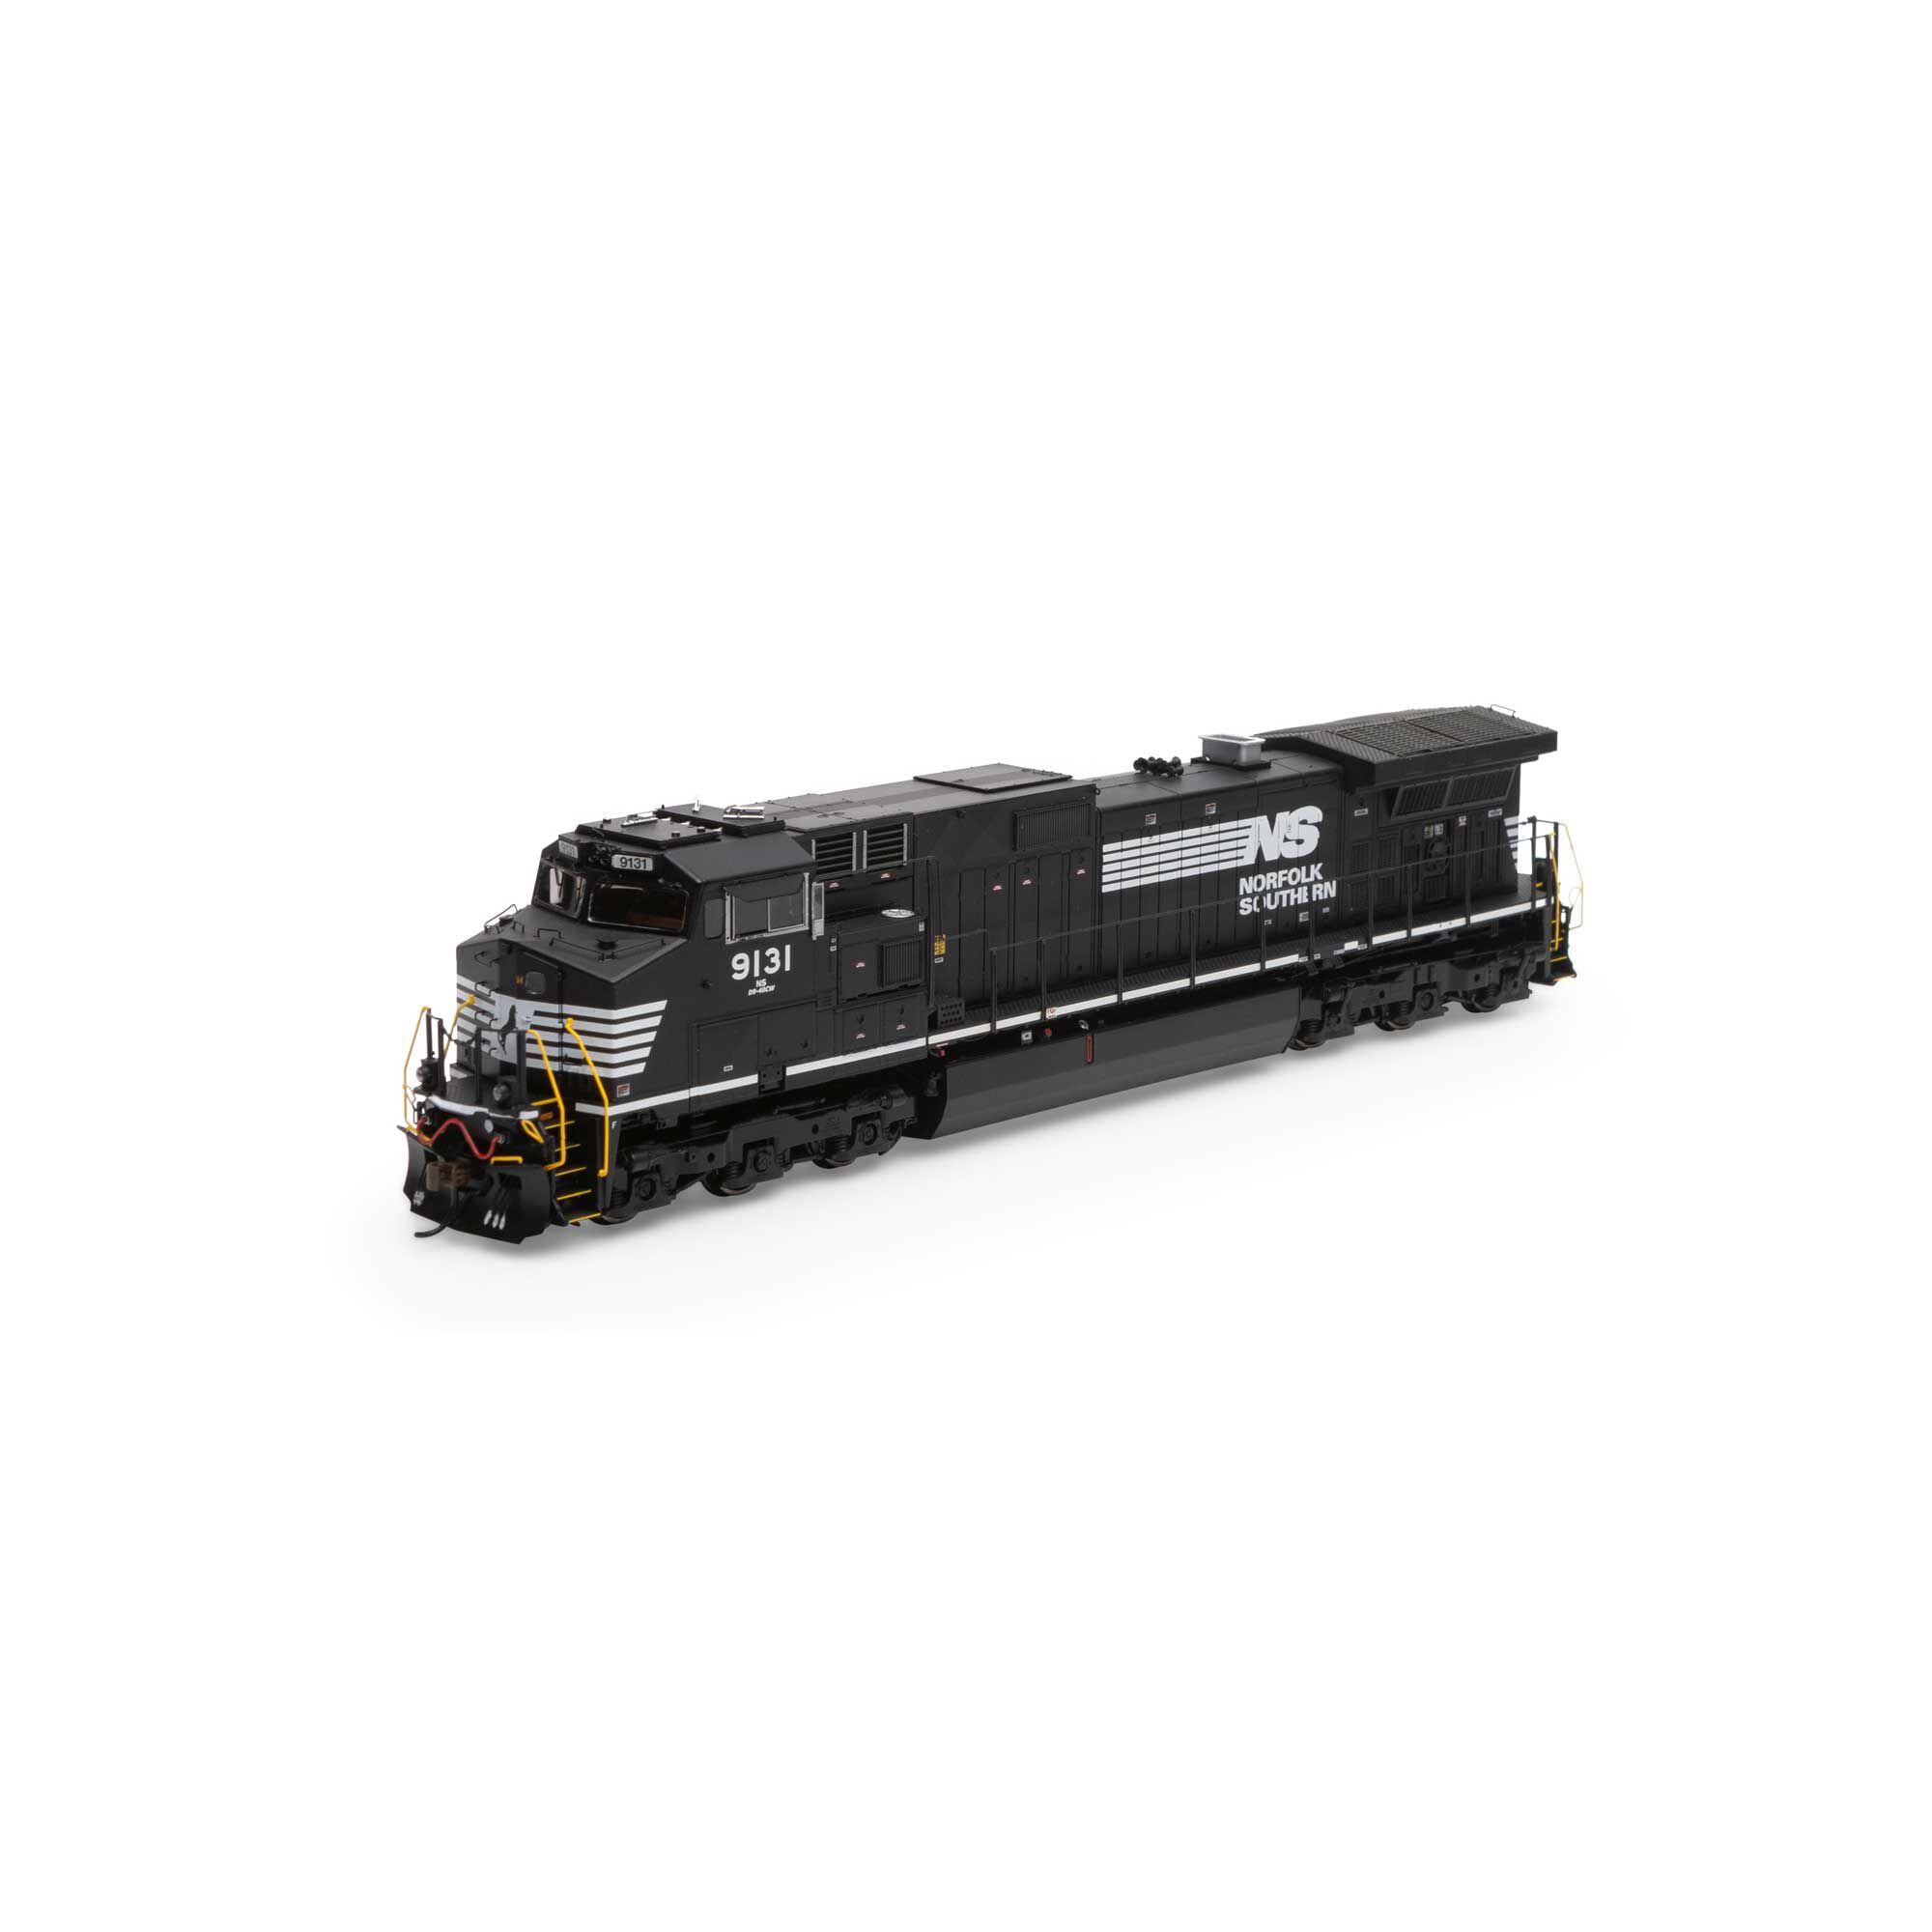 HO G2 Dash 9-44CW with DCC & Sound, NS #9131 Model Train | Athearn